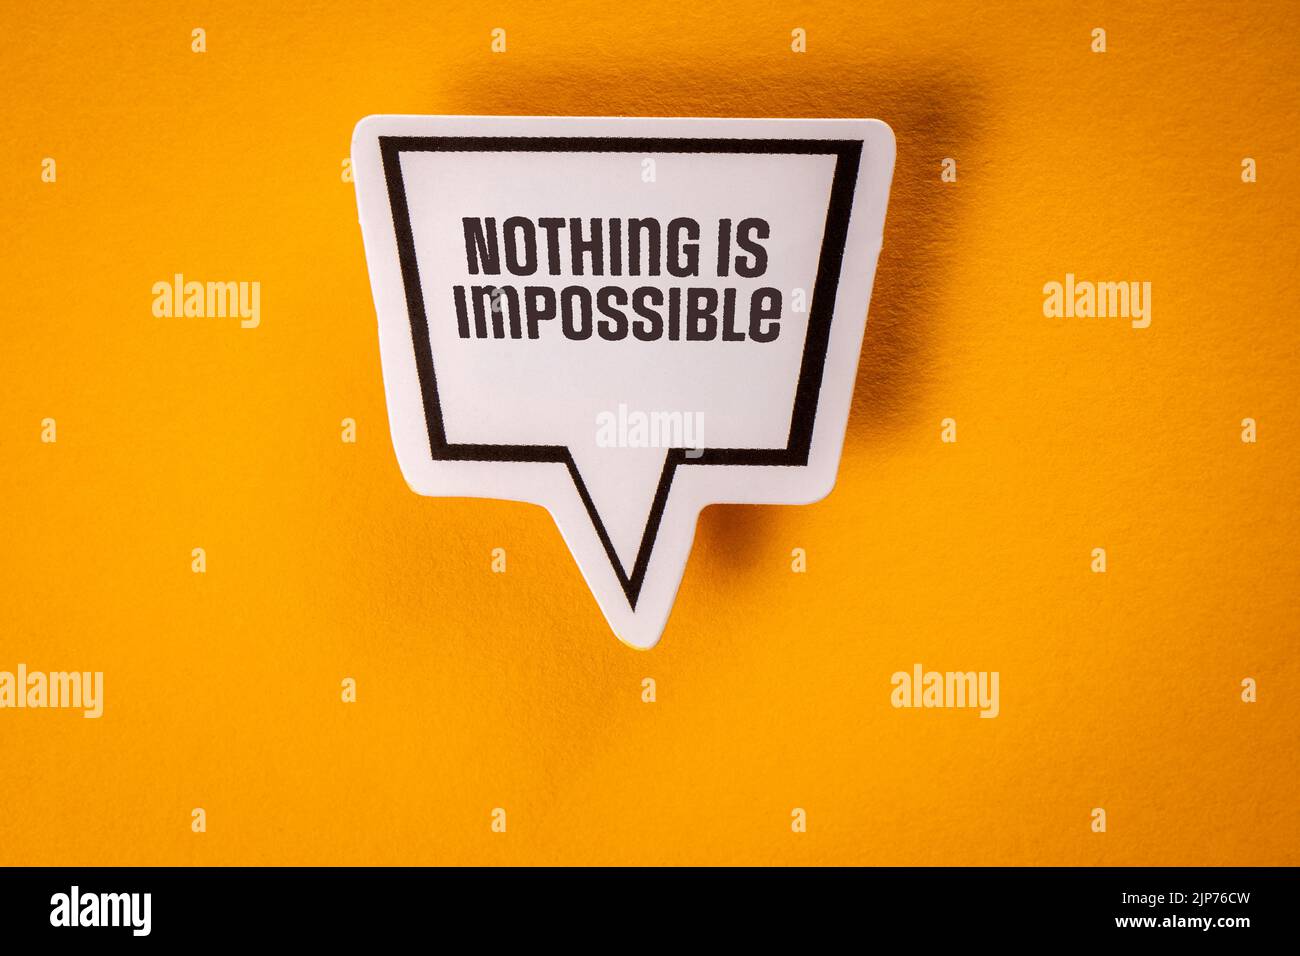 Nothing Is Impossible. Speech bubble with text on yellow background. Stock Photo